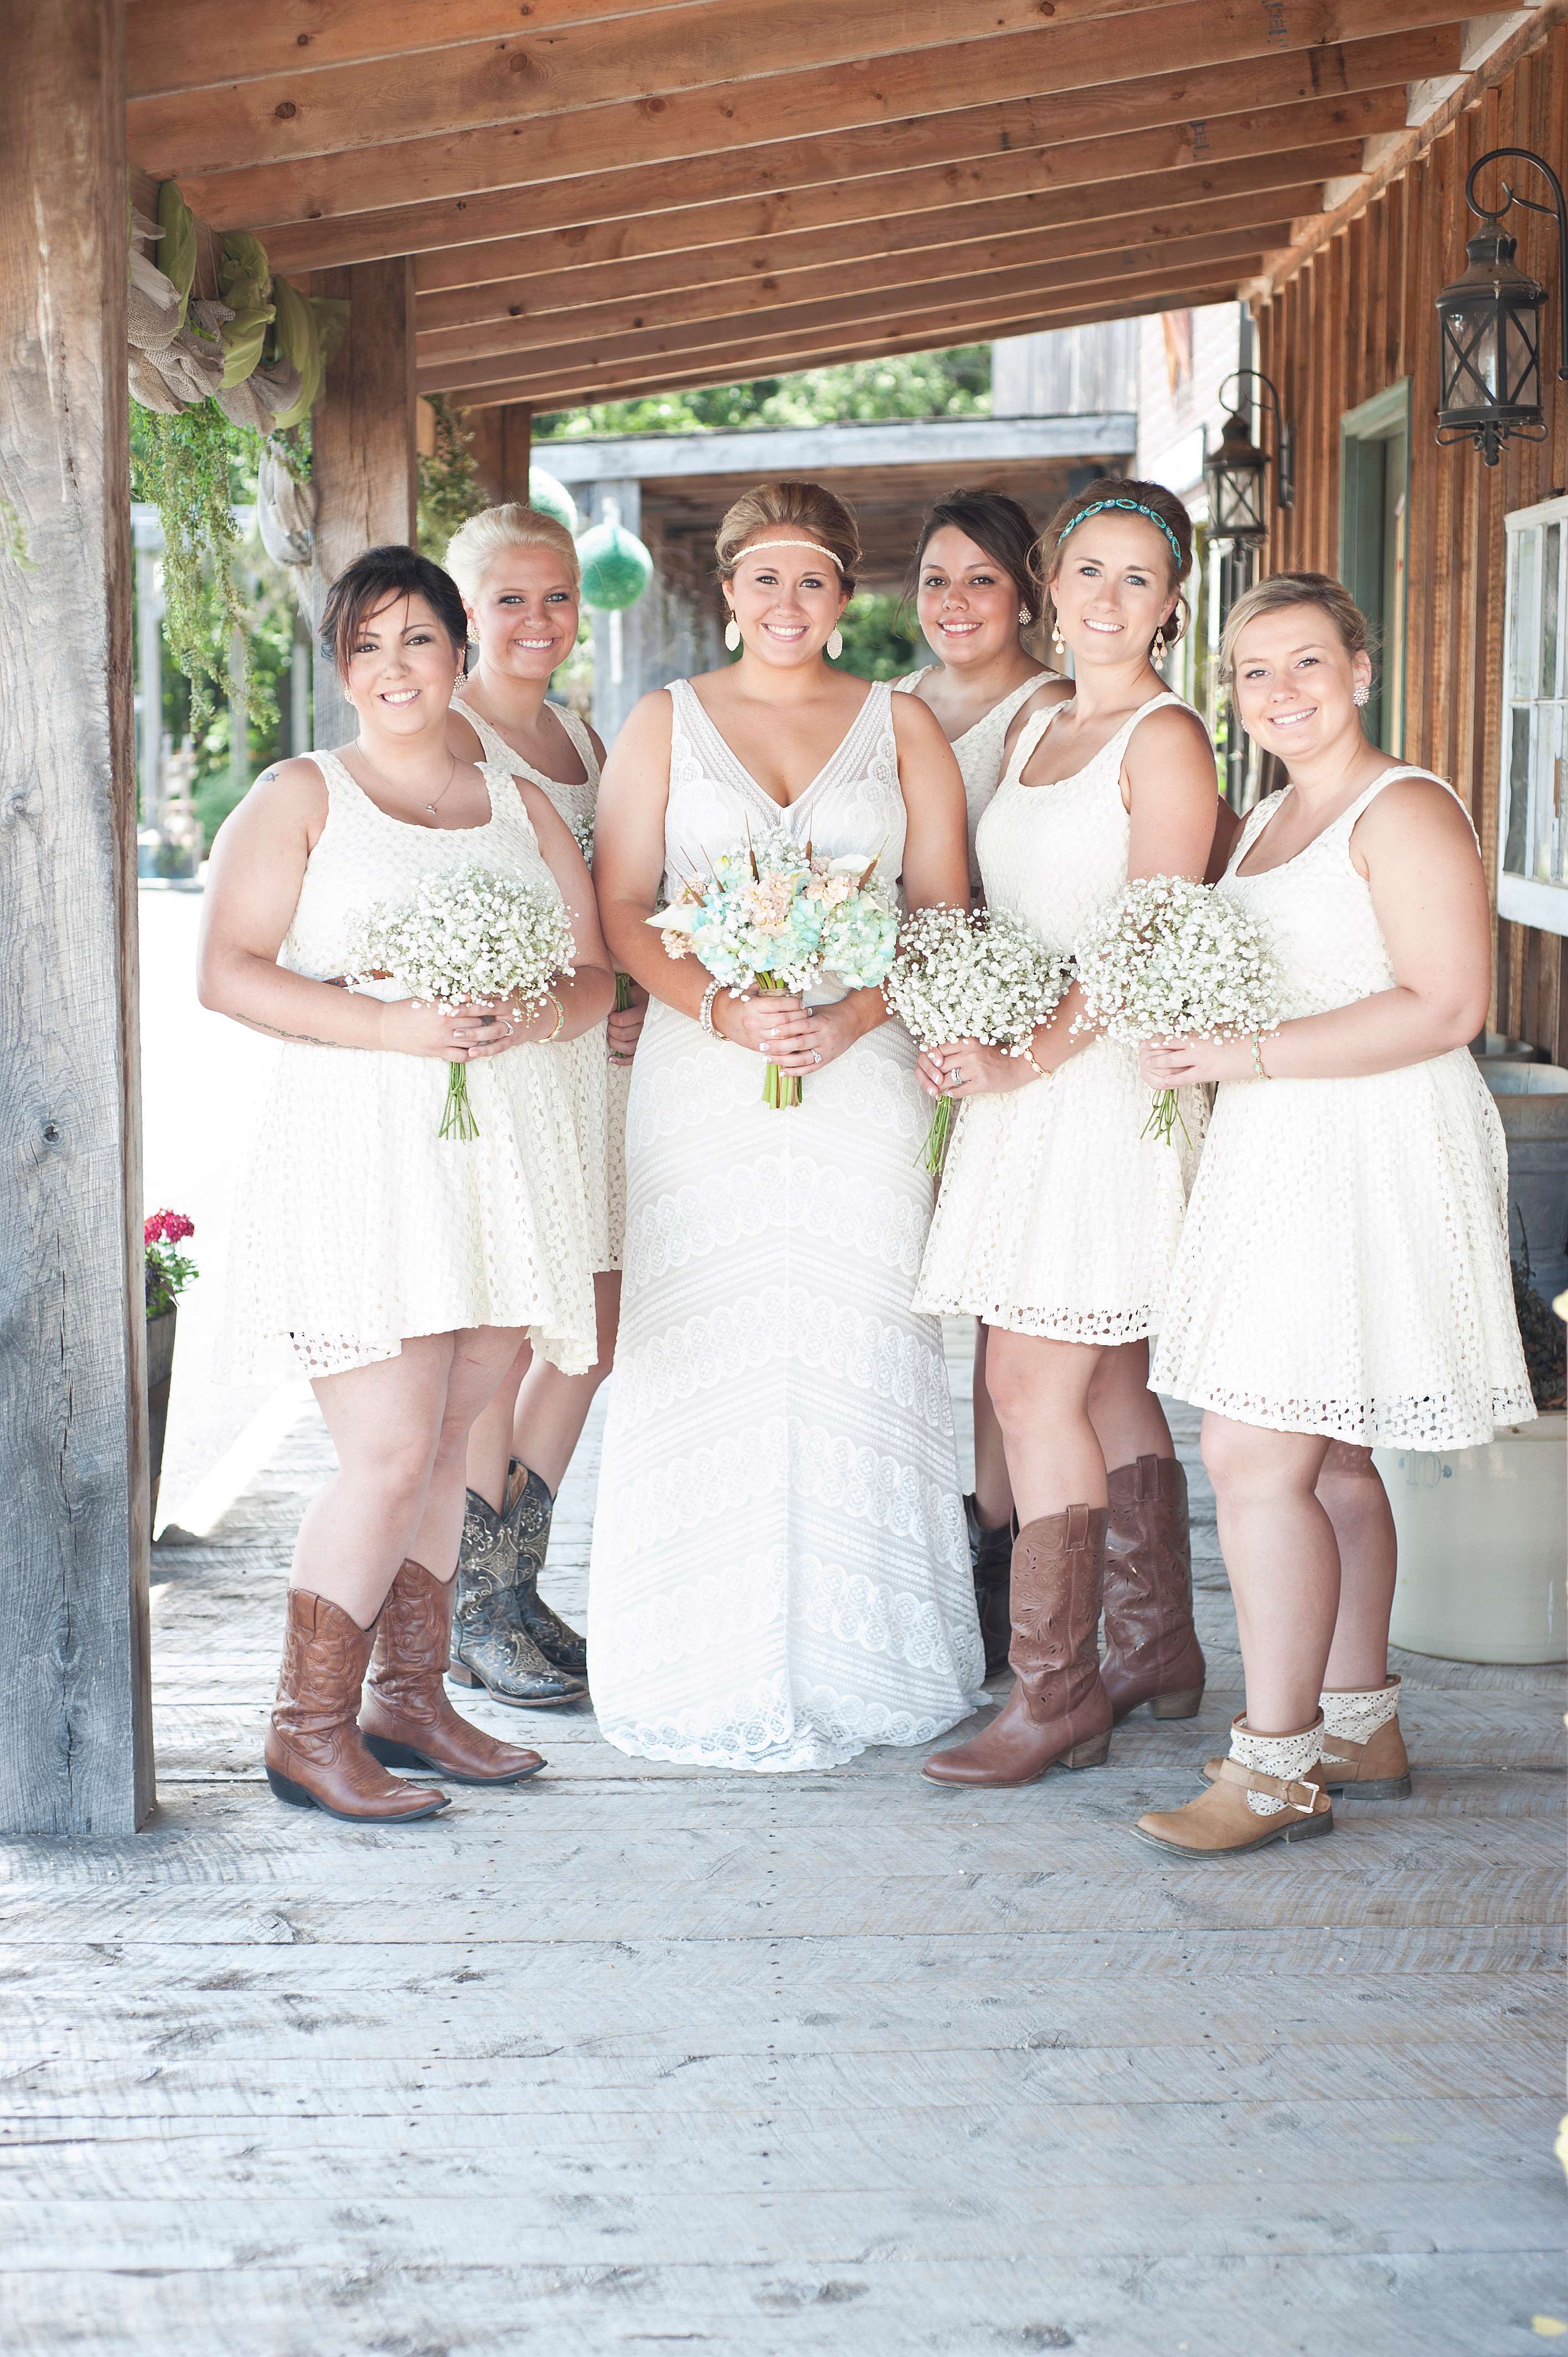 Bride holding bouquet posing for photo with her bridesmaids.